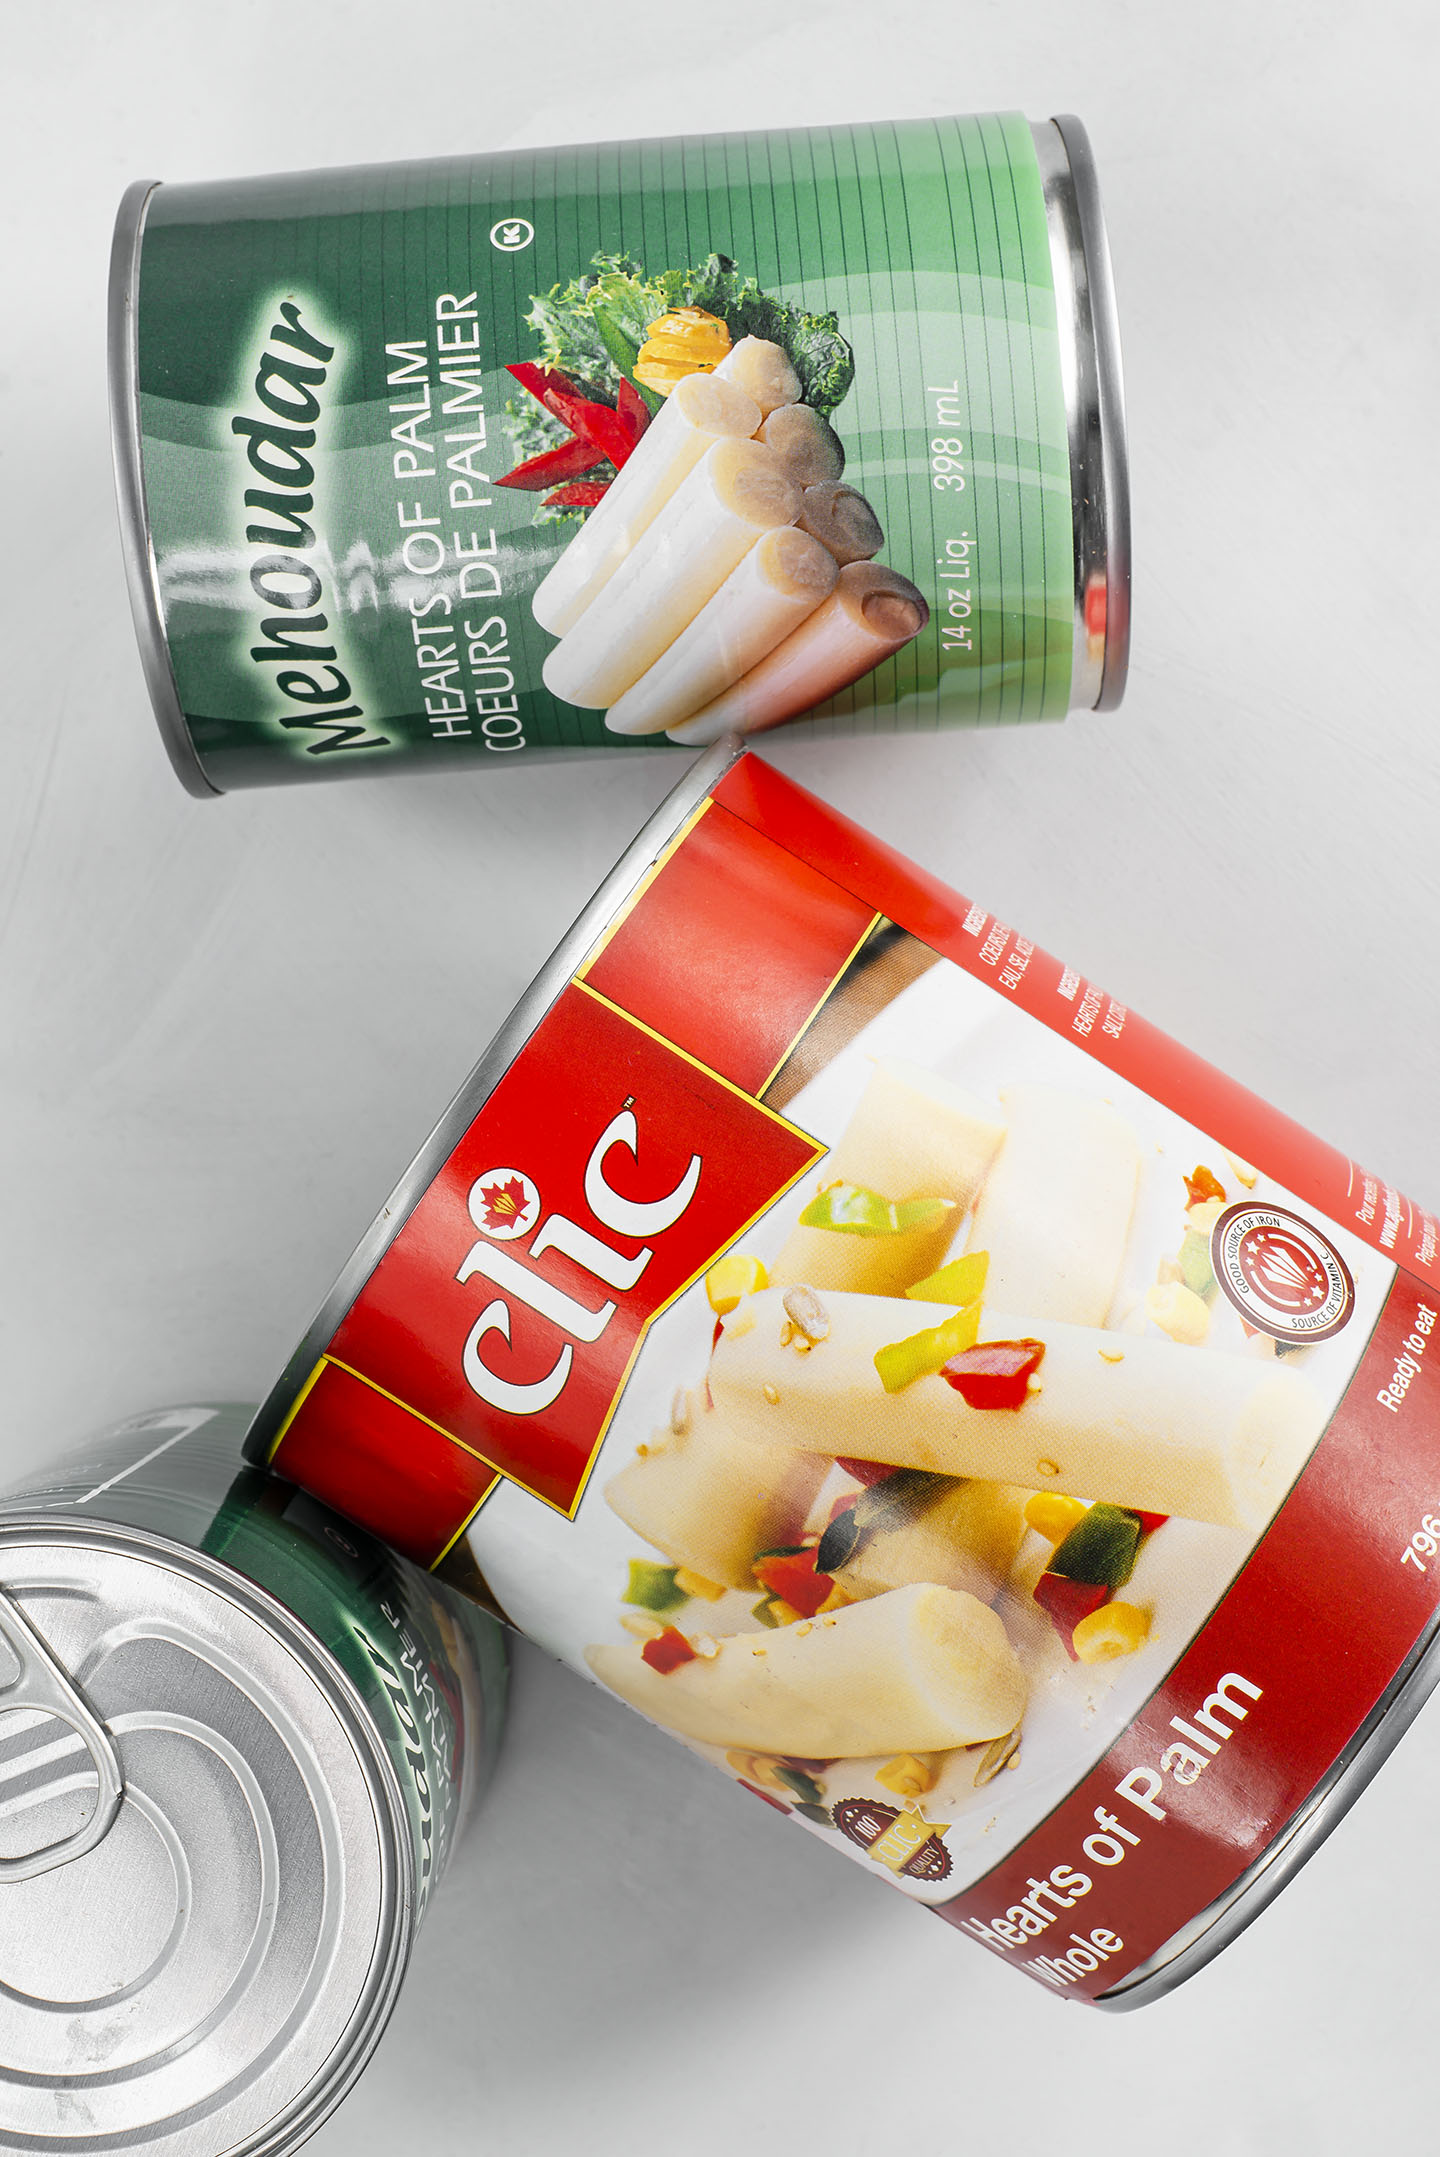 Top down view of various can sizes and brands of hearts of palm. Clic brand 796ml and